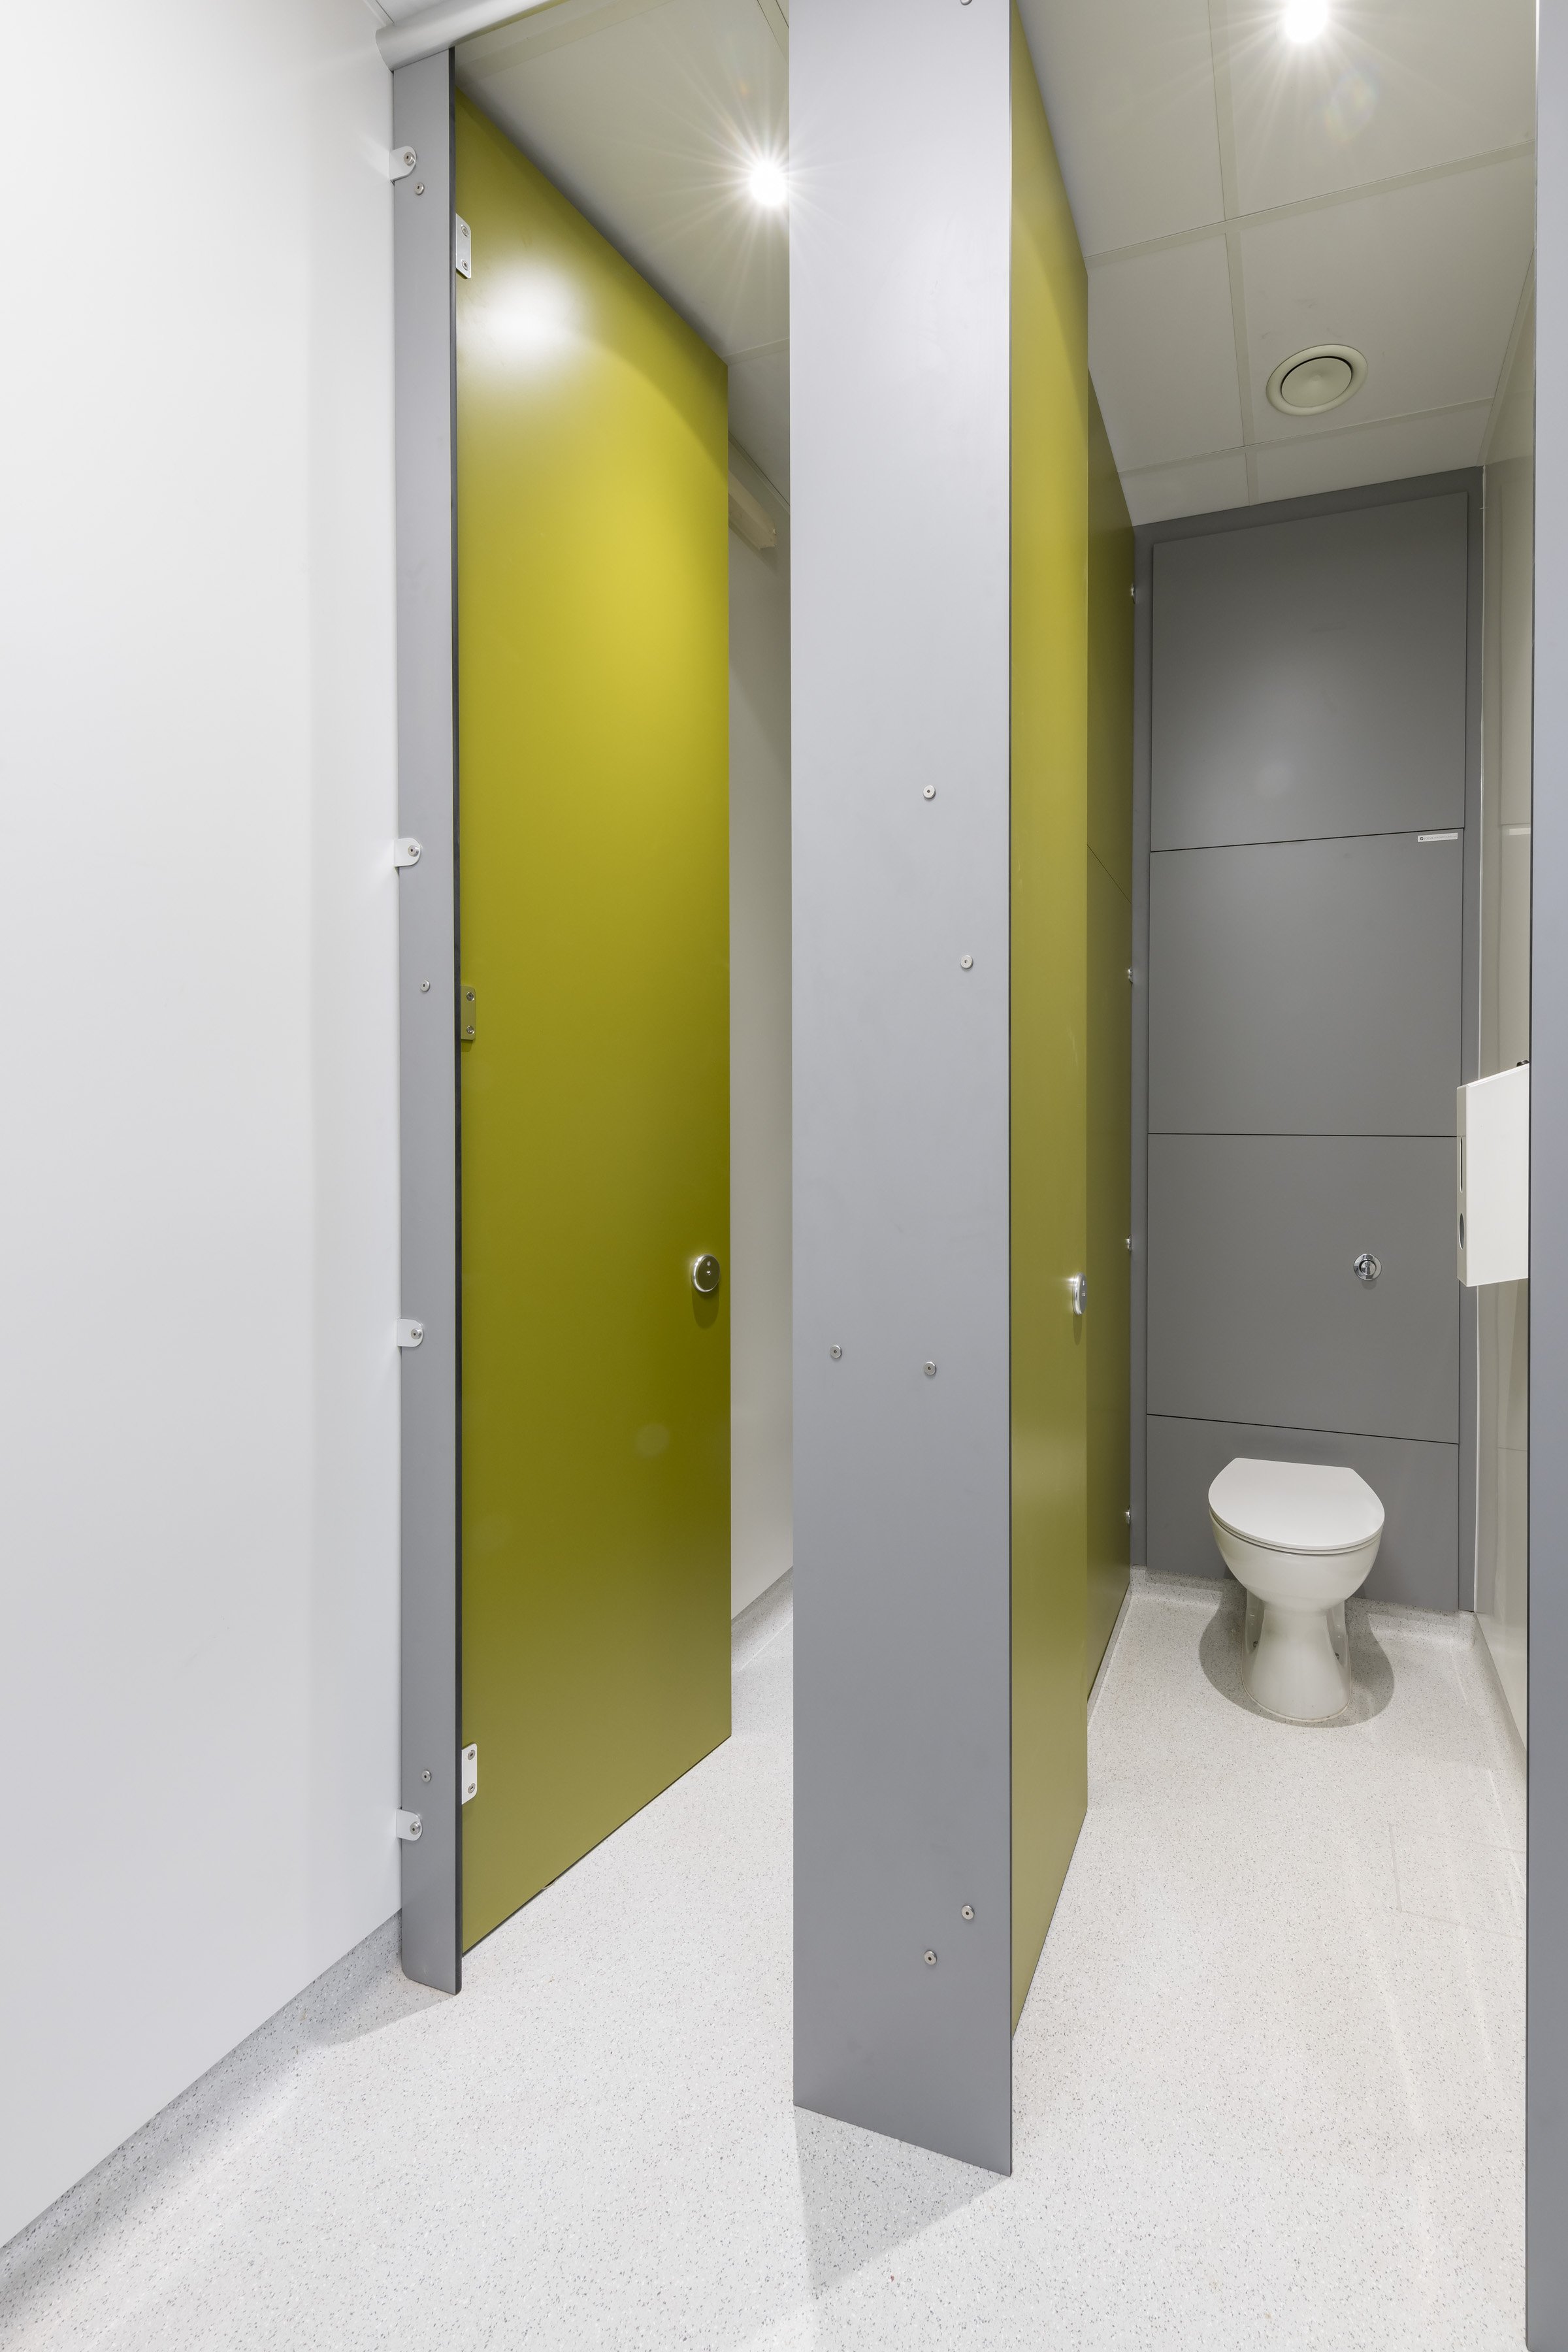 privacy toilet cubicles at stoke high.jpg